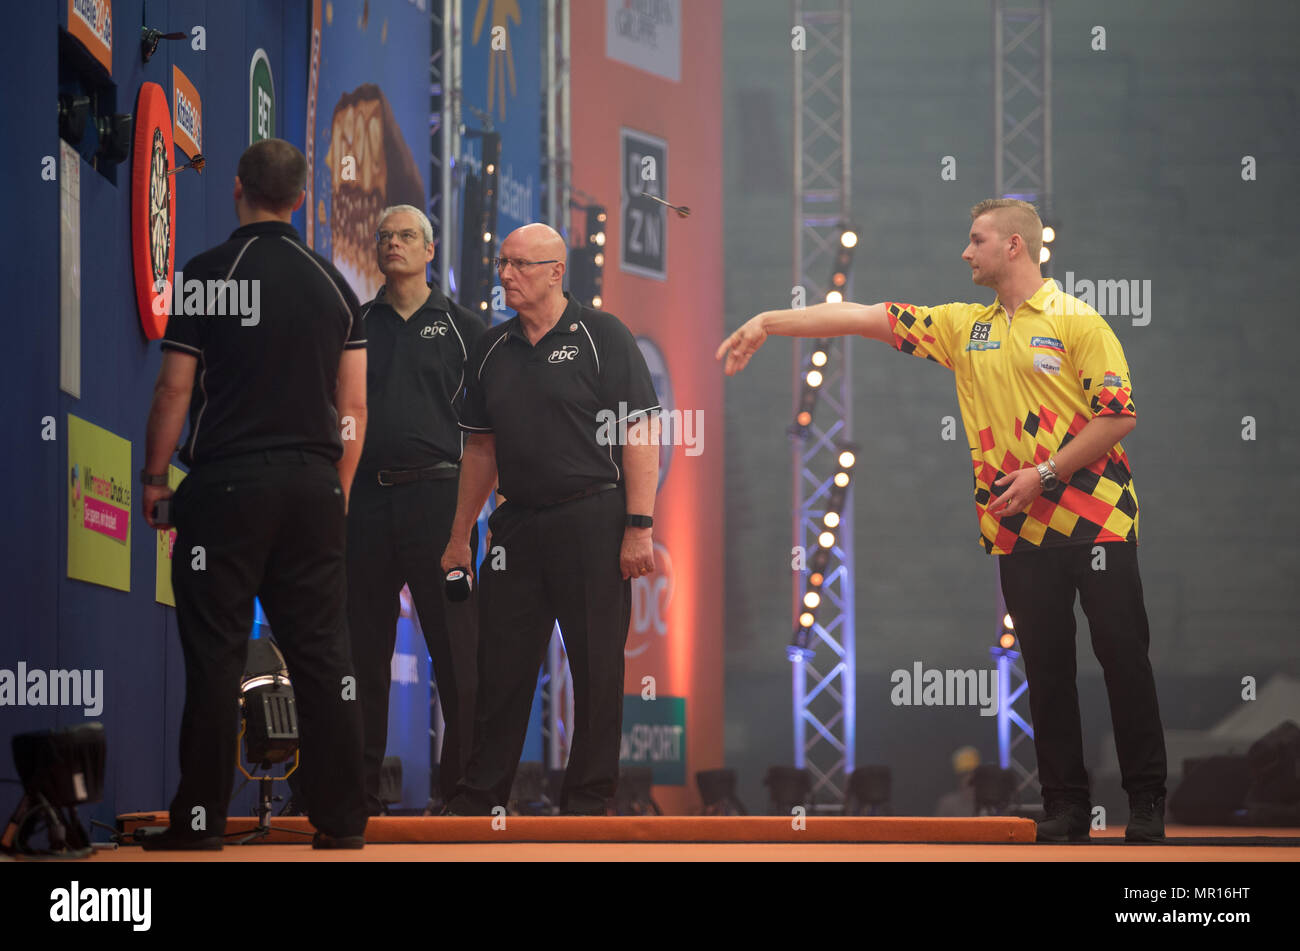 German Darts Masters High Resolution Stock Photography and Images - Alamy